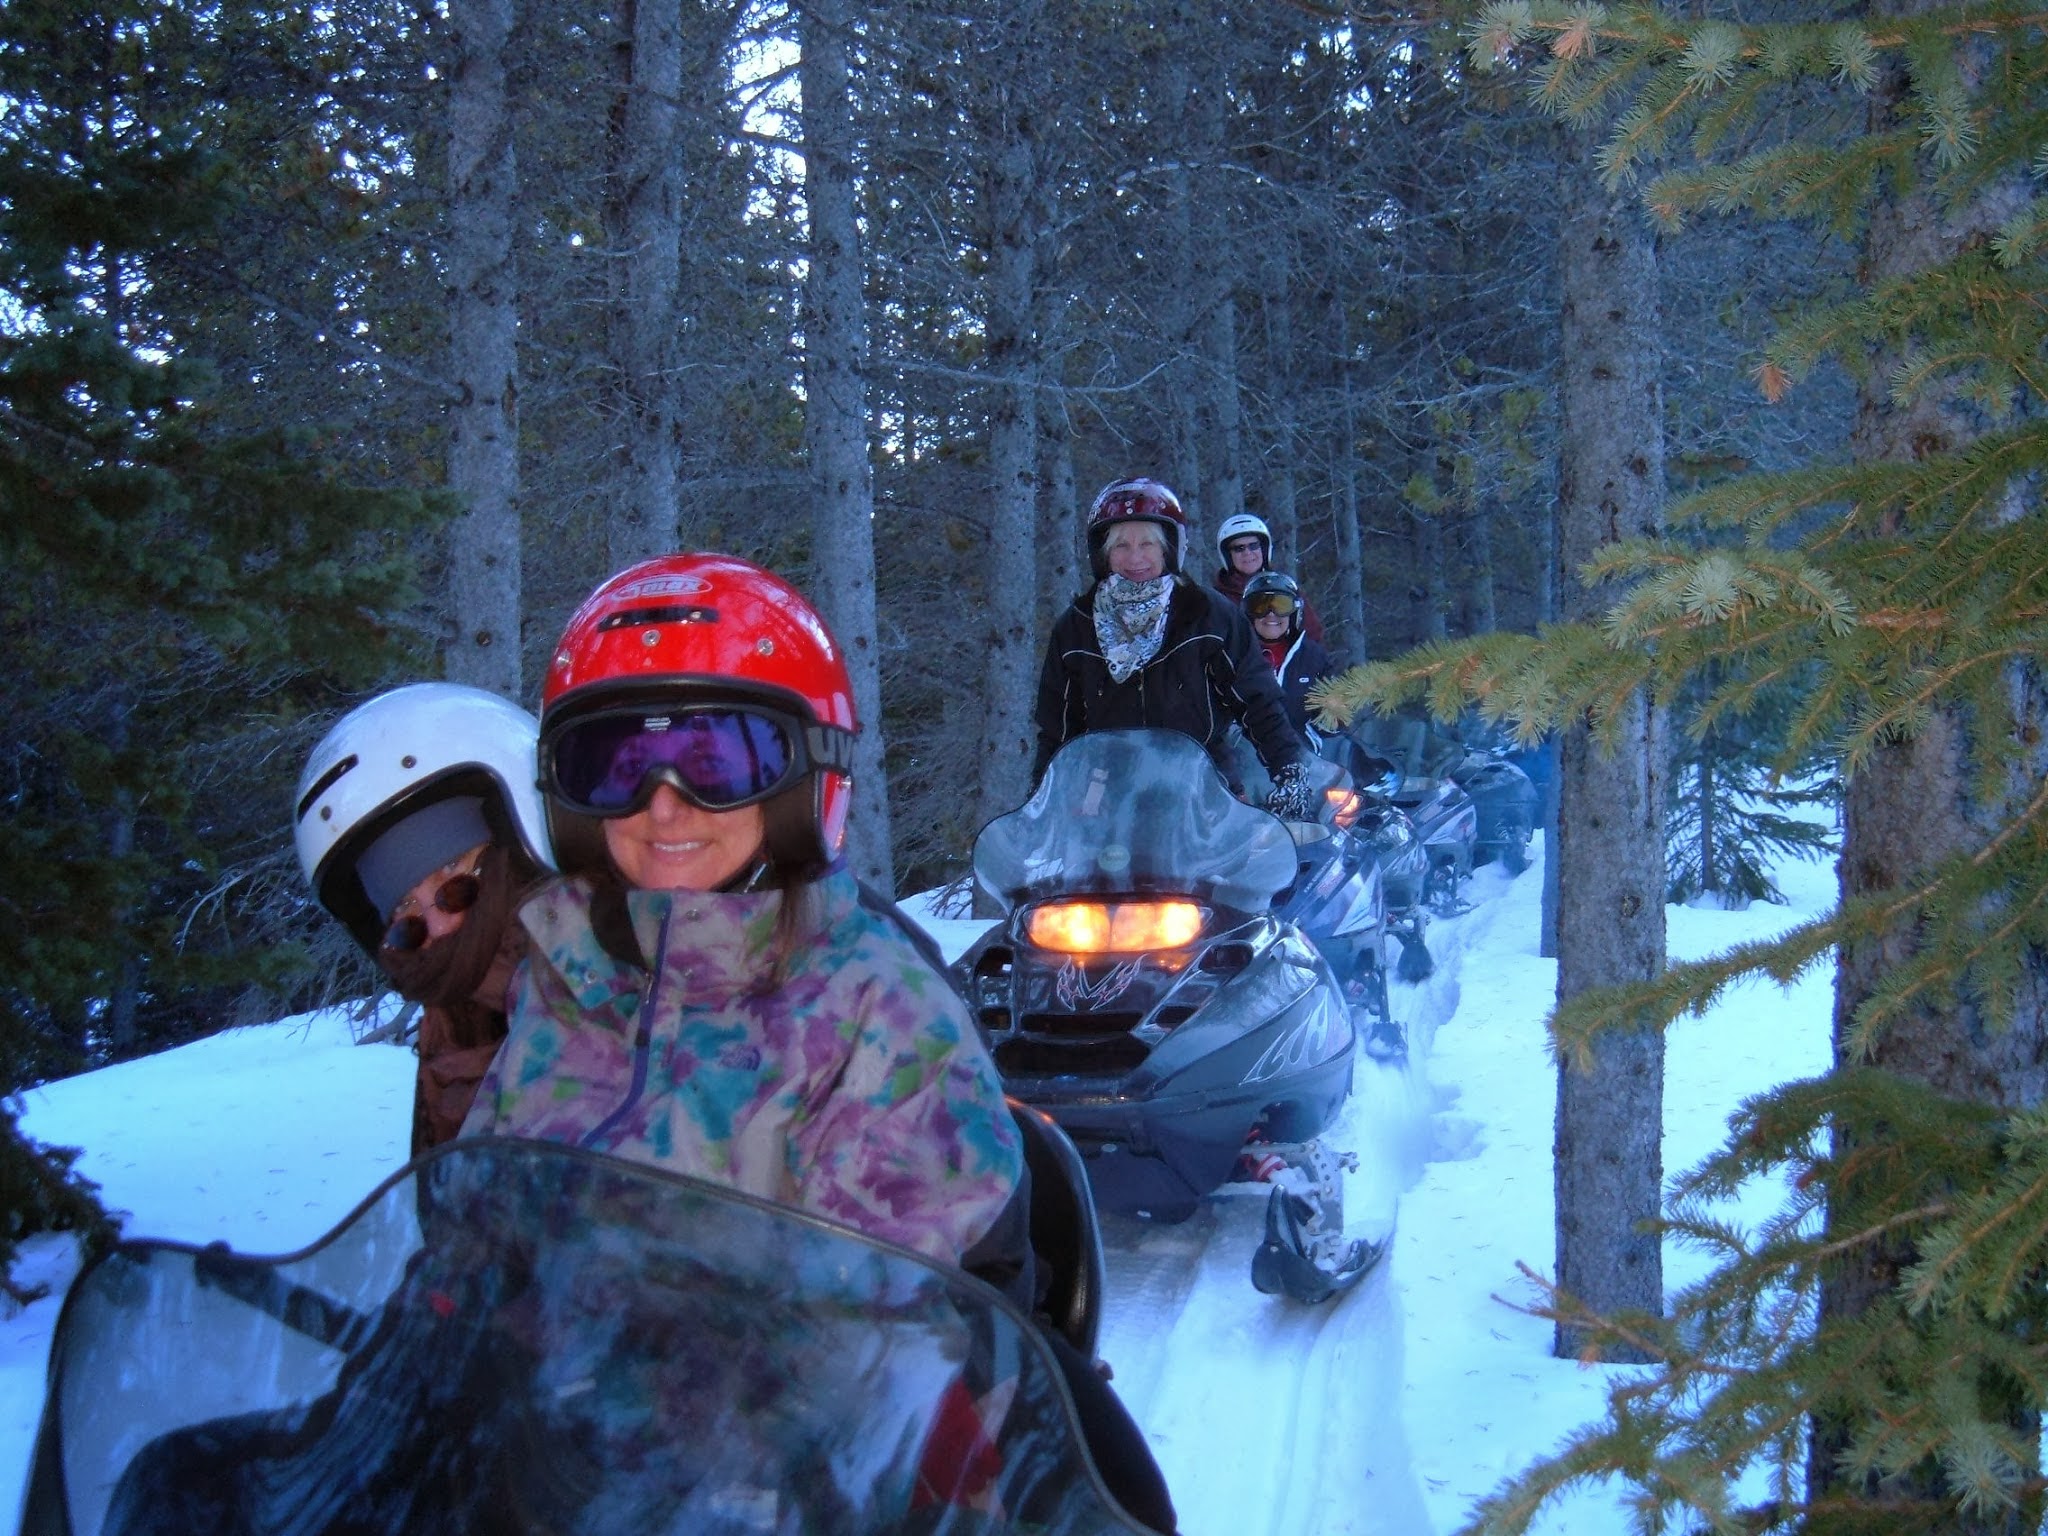 Snowmobile tour with five guests.  Riding a trail through trees on both sides.